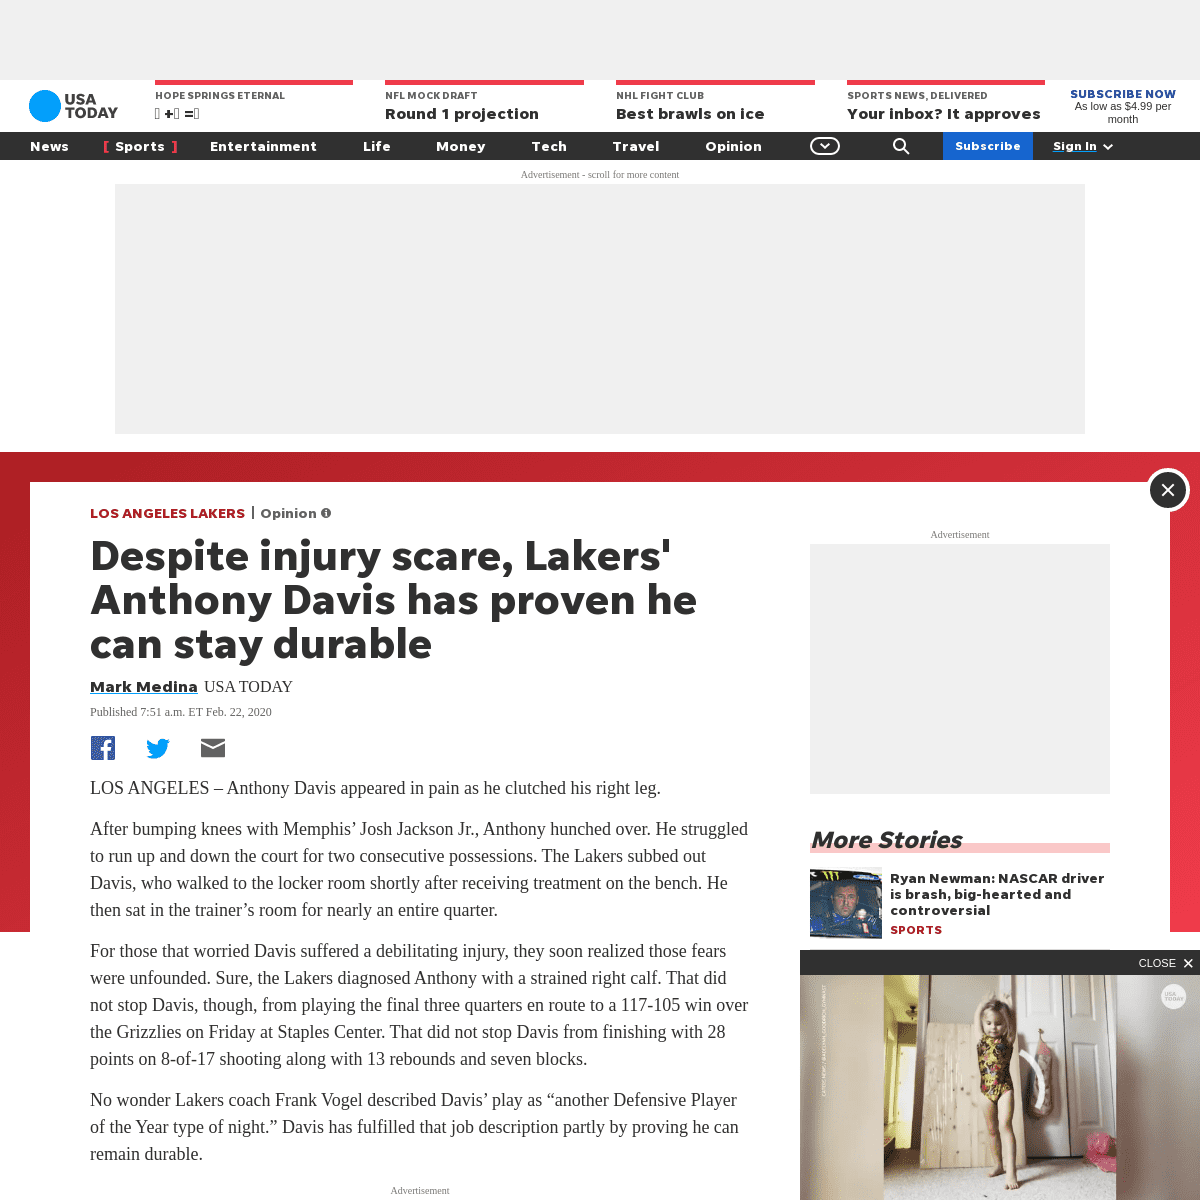 A complete backup of www.usatoday.com/story/sports/nba/lakers/2020/02/22/lakers-anthony-davis-durable-injury/4841147002/